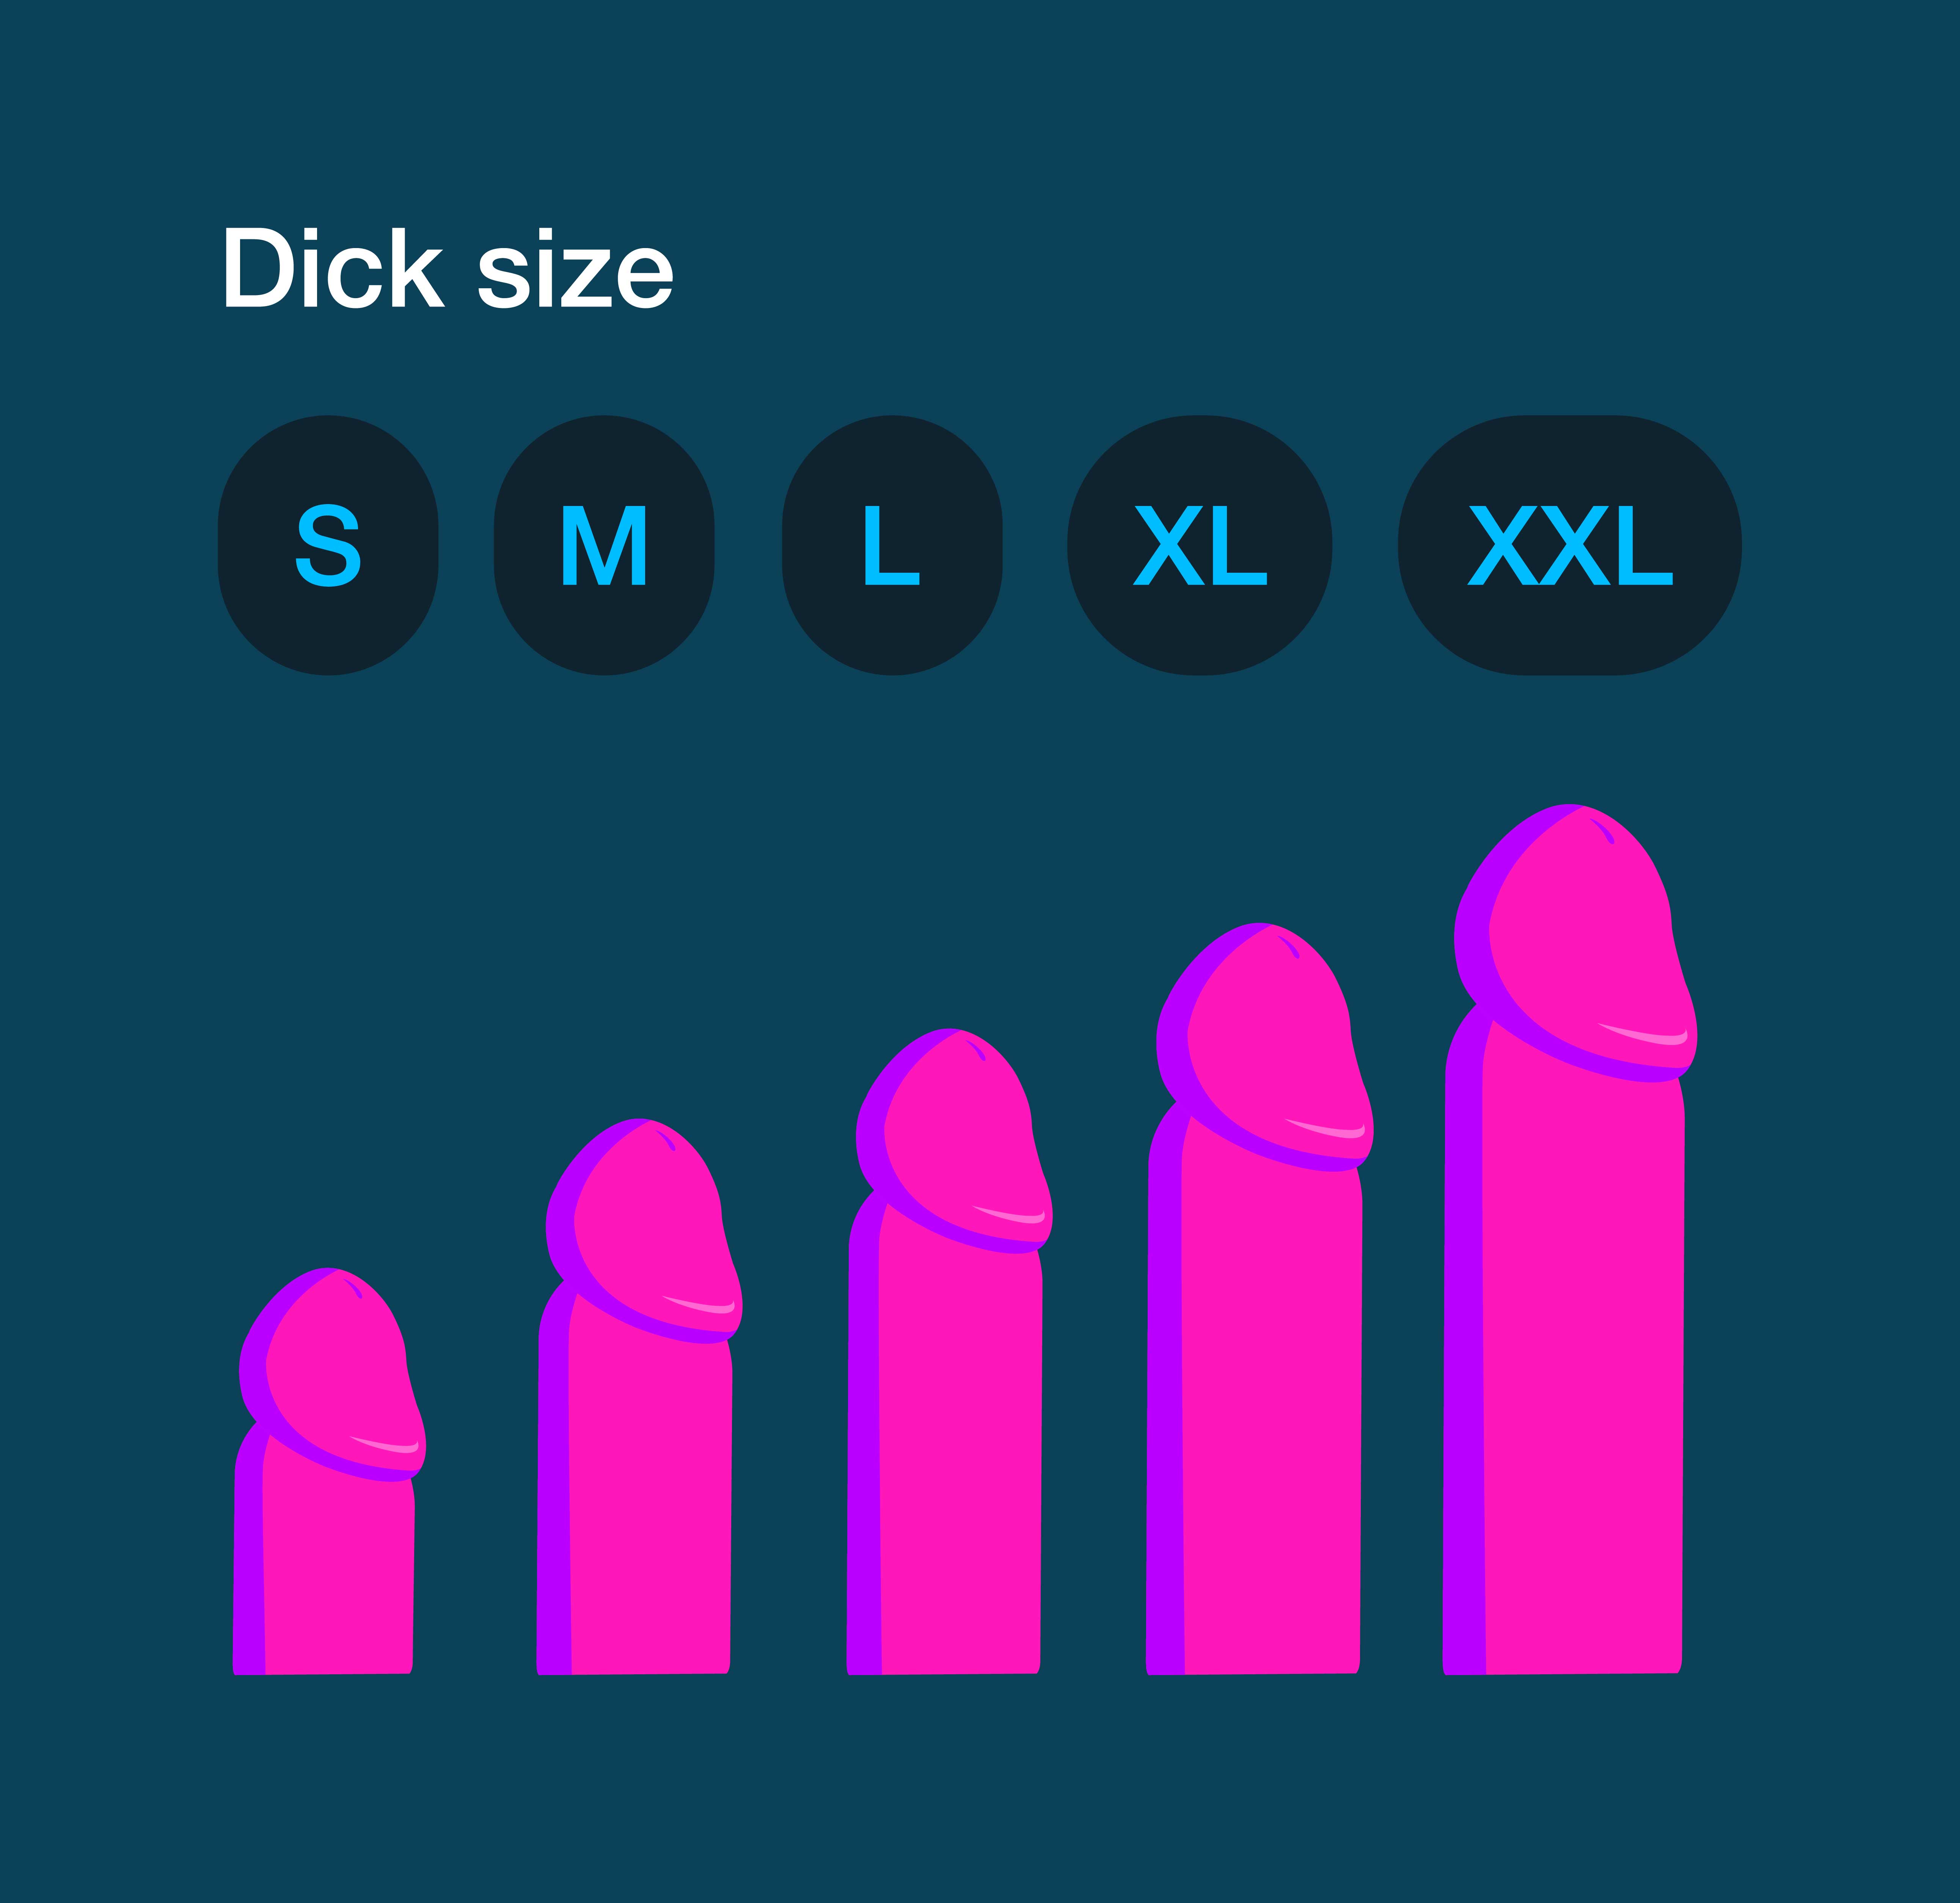 Dick sizes in pictures